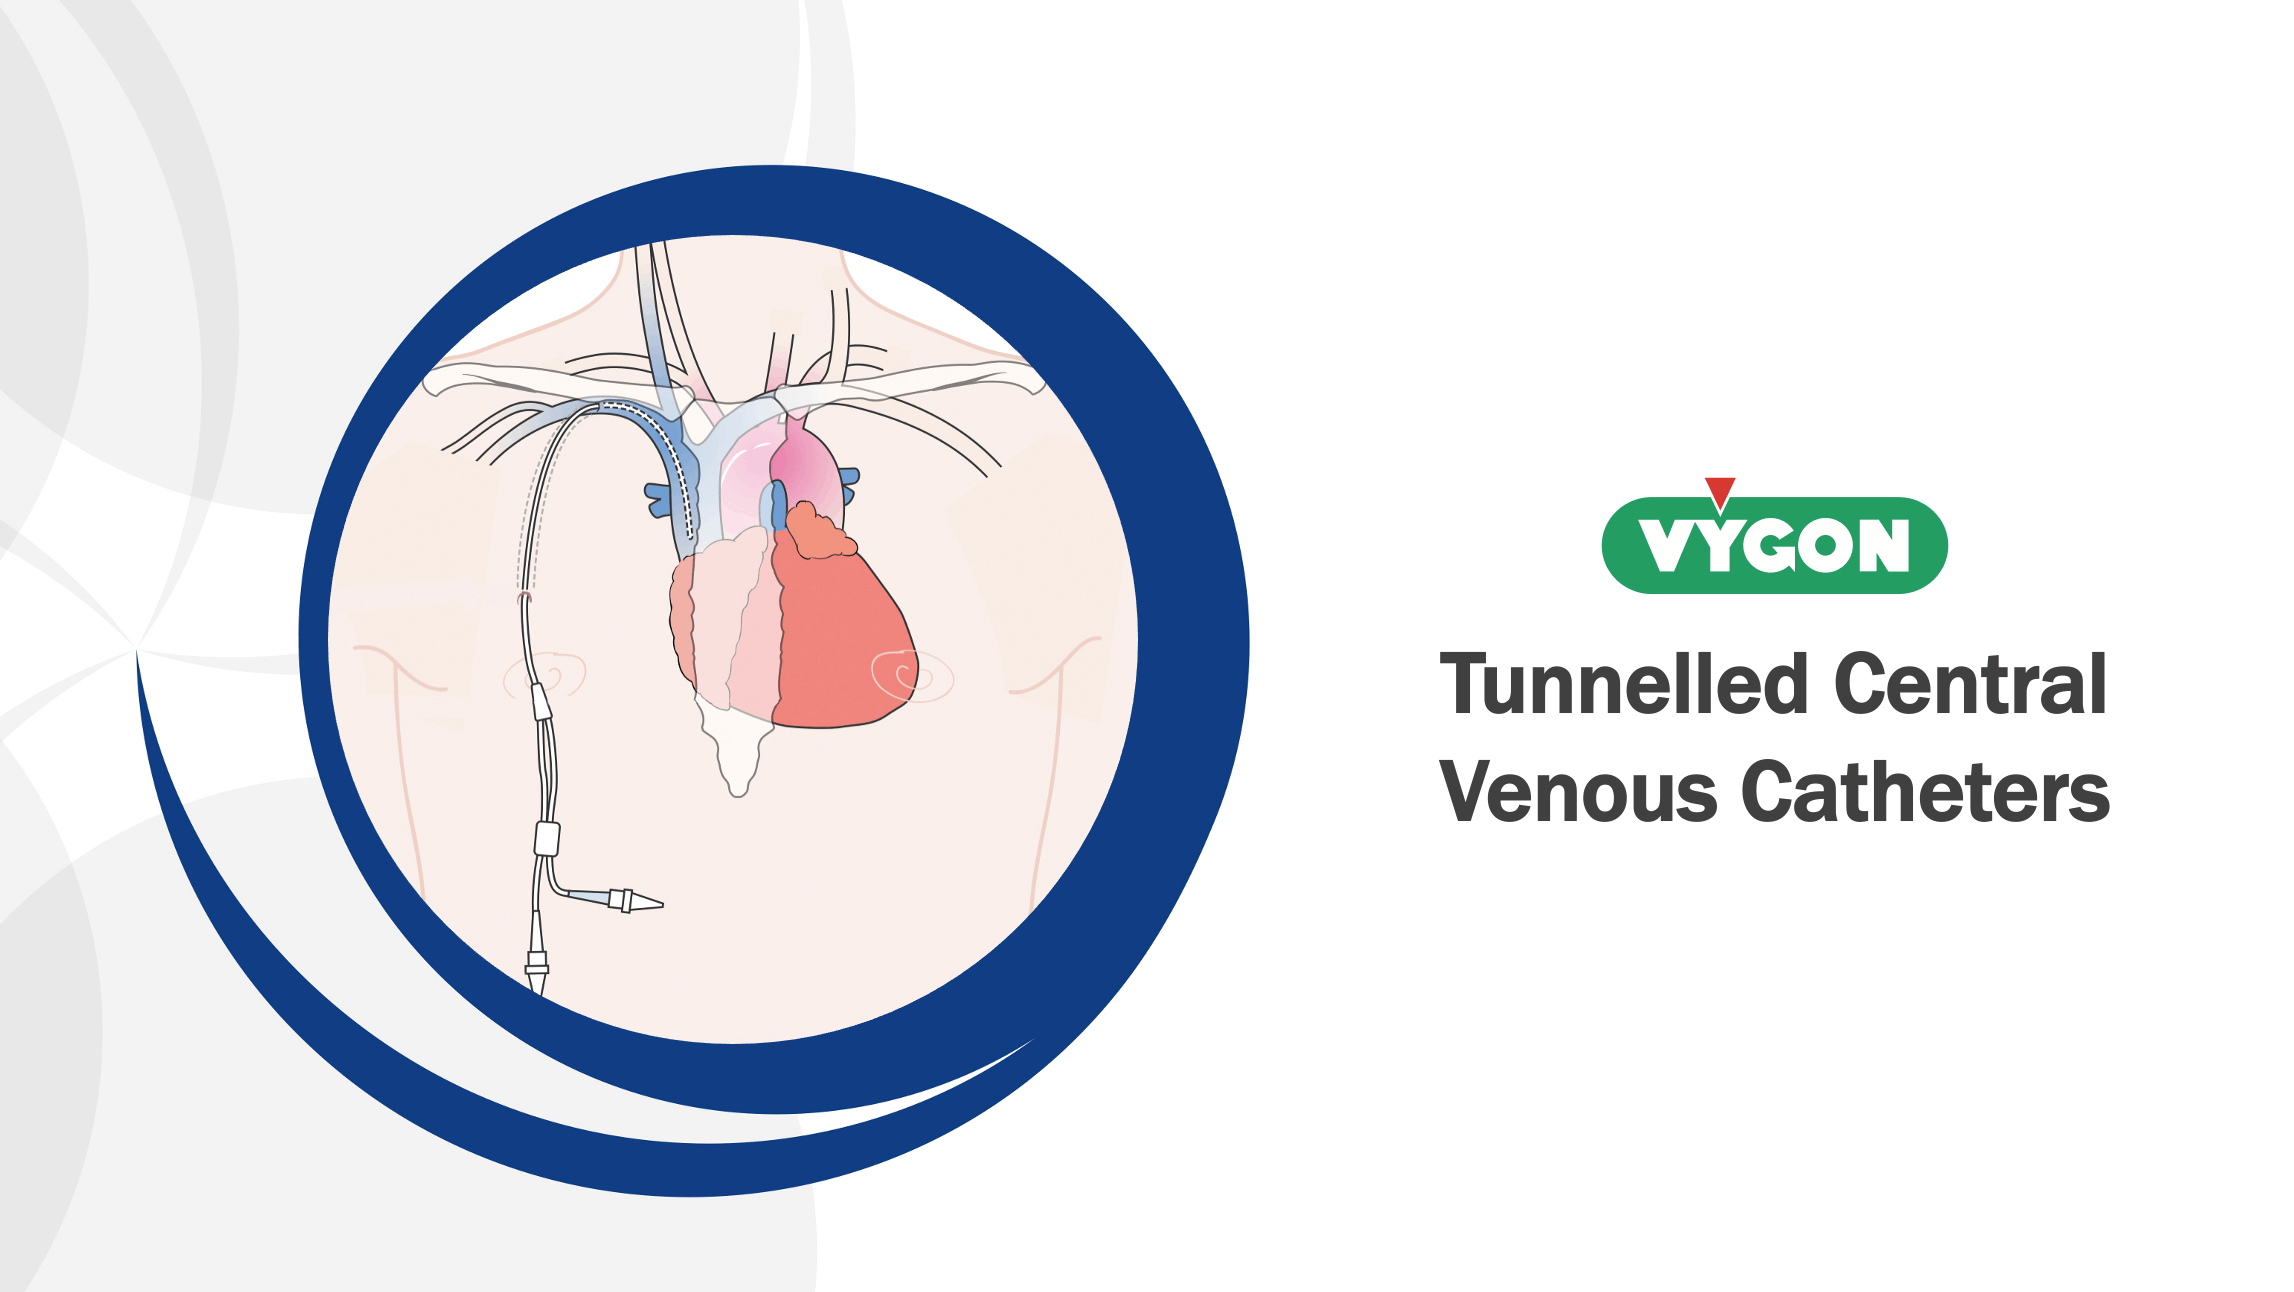 Vygon Tunnelled Central Venous Catheters